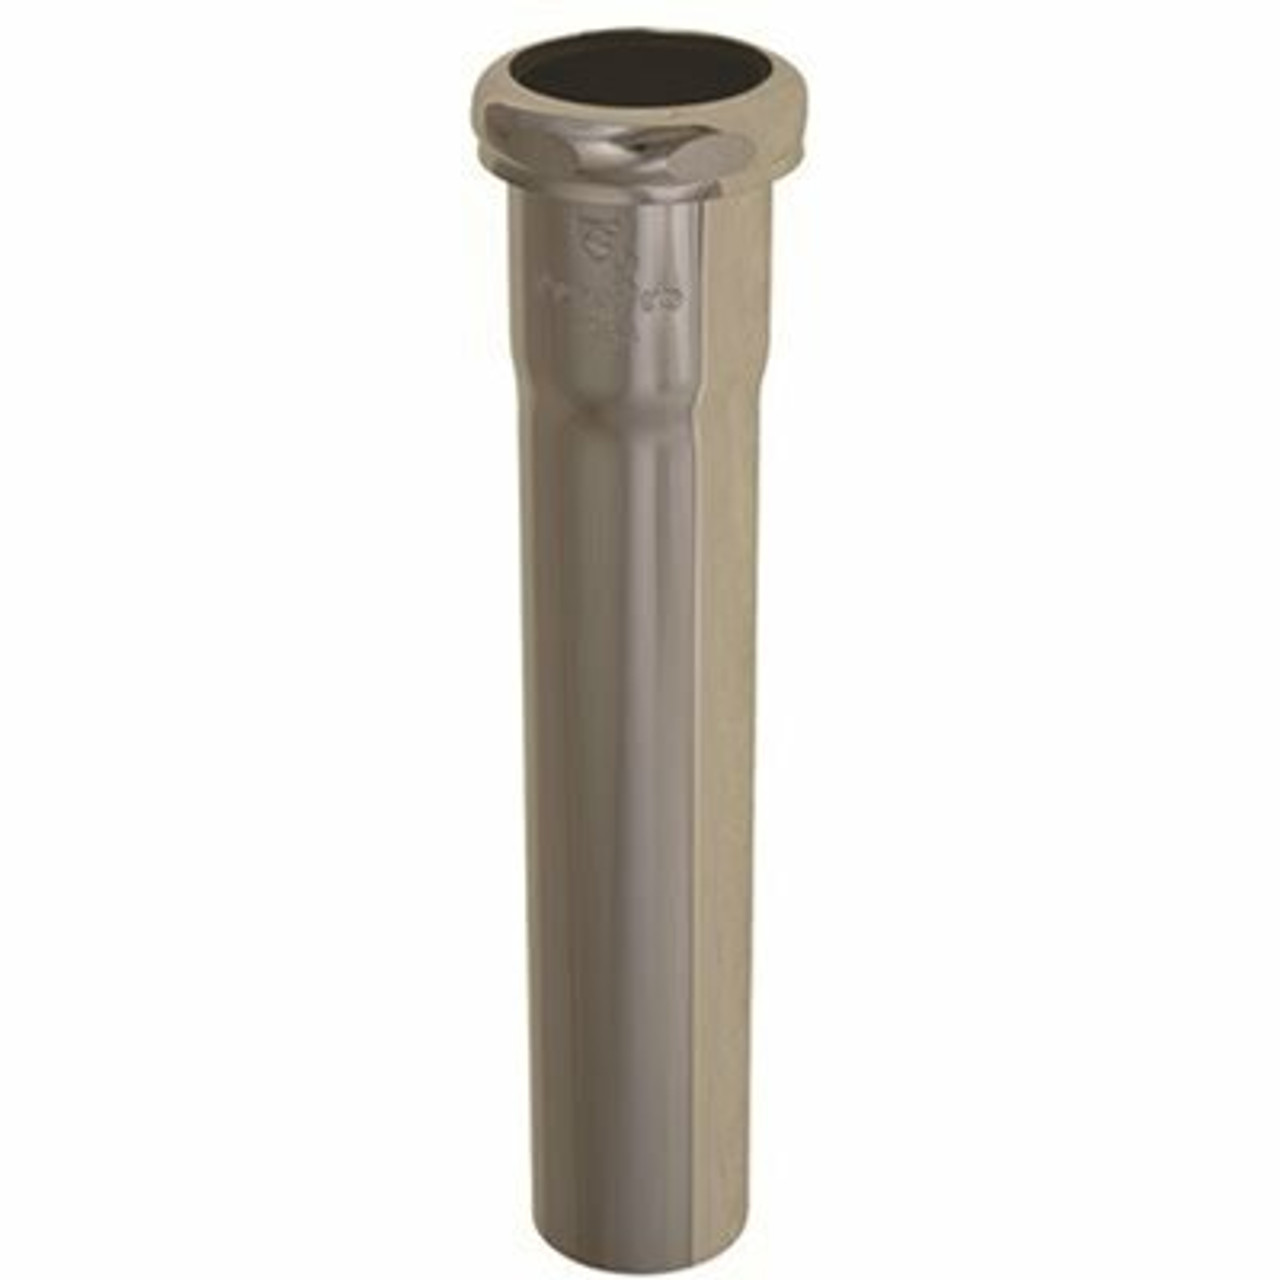 Premier 1-1/2 In. X 8 In. Brass Extension Tube With Slip Joint, Chrome, 17-Gauge